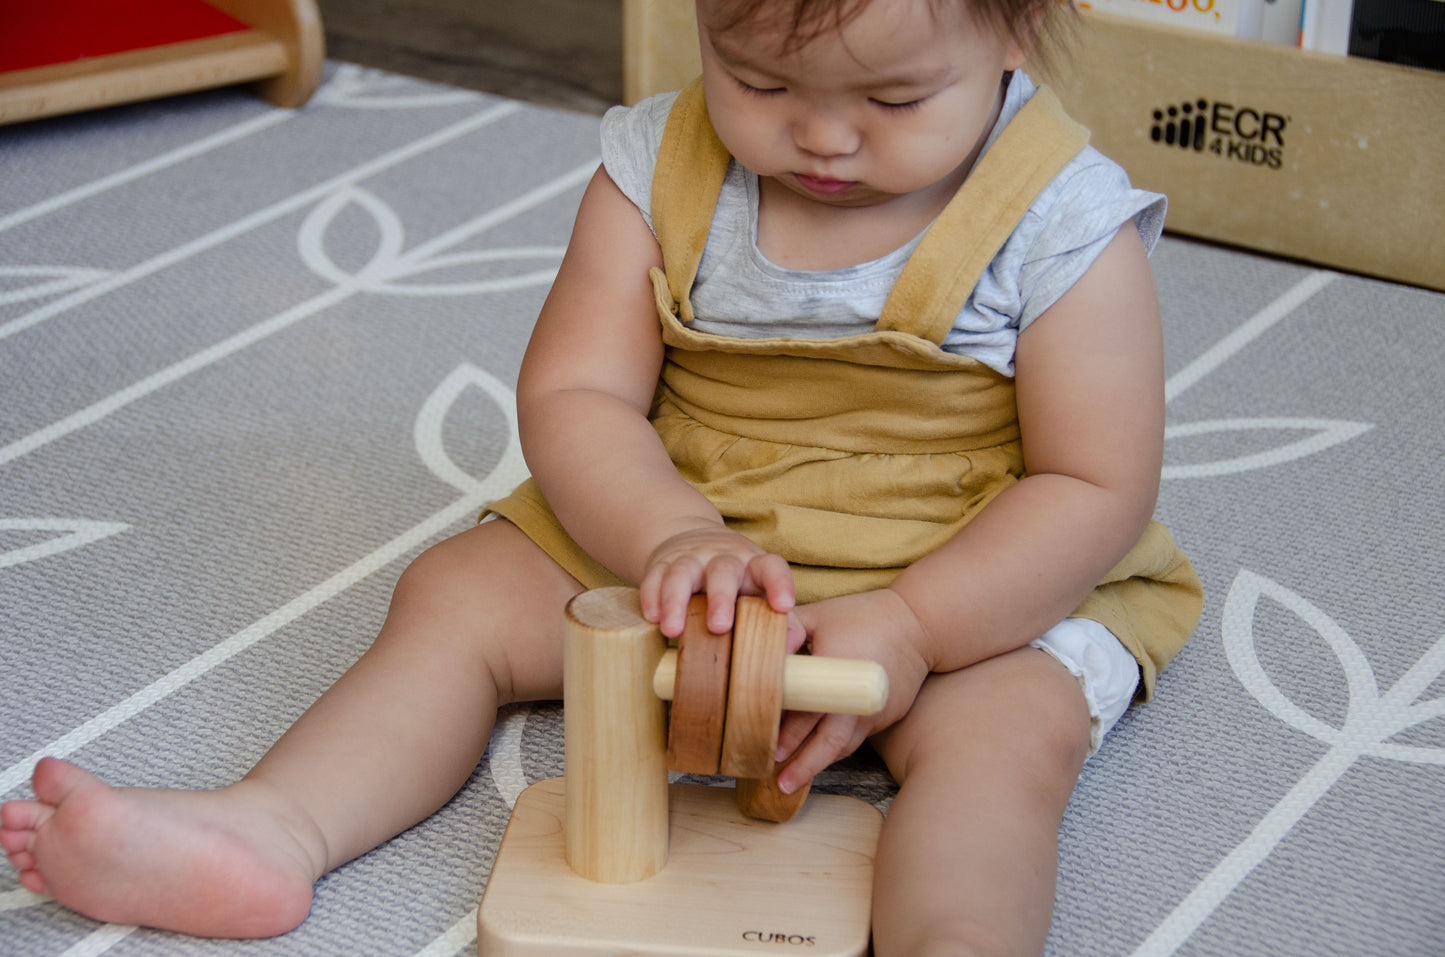 Adorable baby girl attentively placing the wooden ring on the Cubos Horizontal Dowel Rings Stacker, focused on the task and learning the concept of stacking, all while having a fun and rewarding playtime experience.